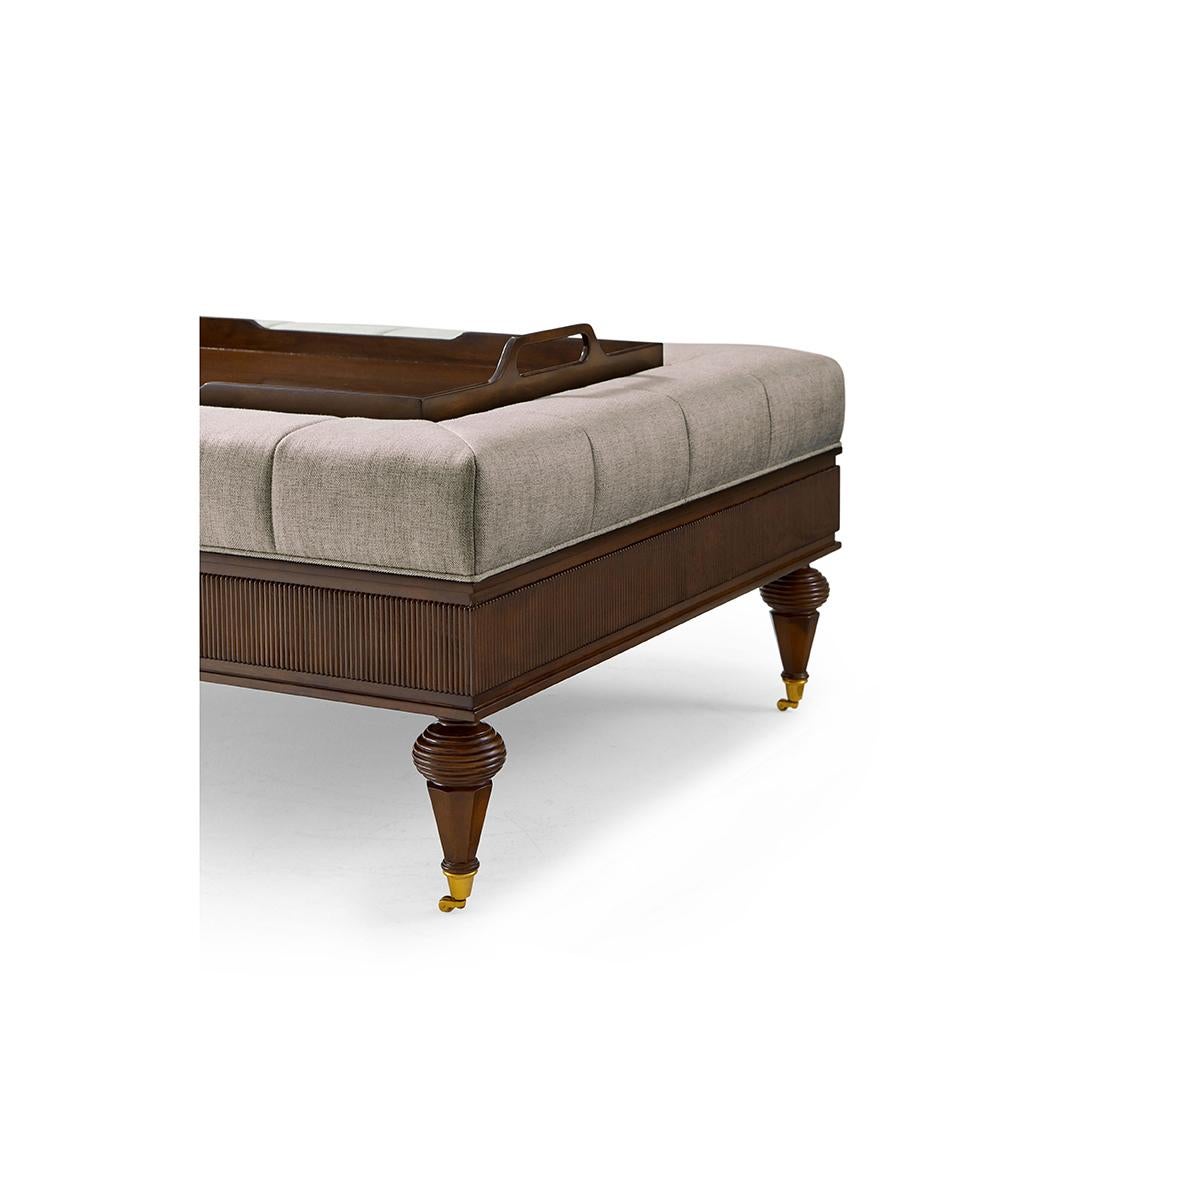 Transitional Tray Top Cocktail Ottoman im Zustand „Neu“ in Westwood, NJ